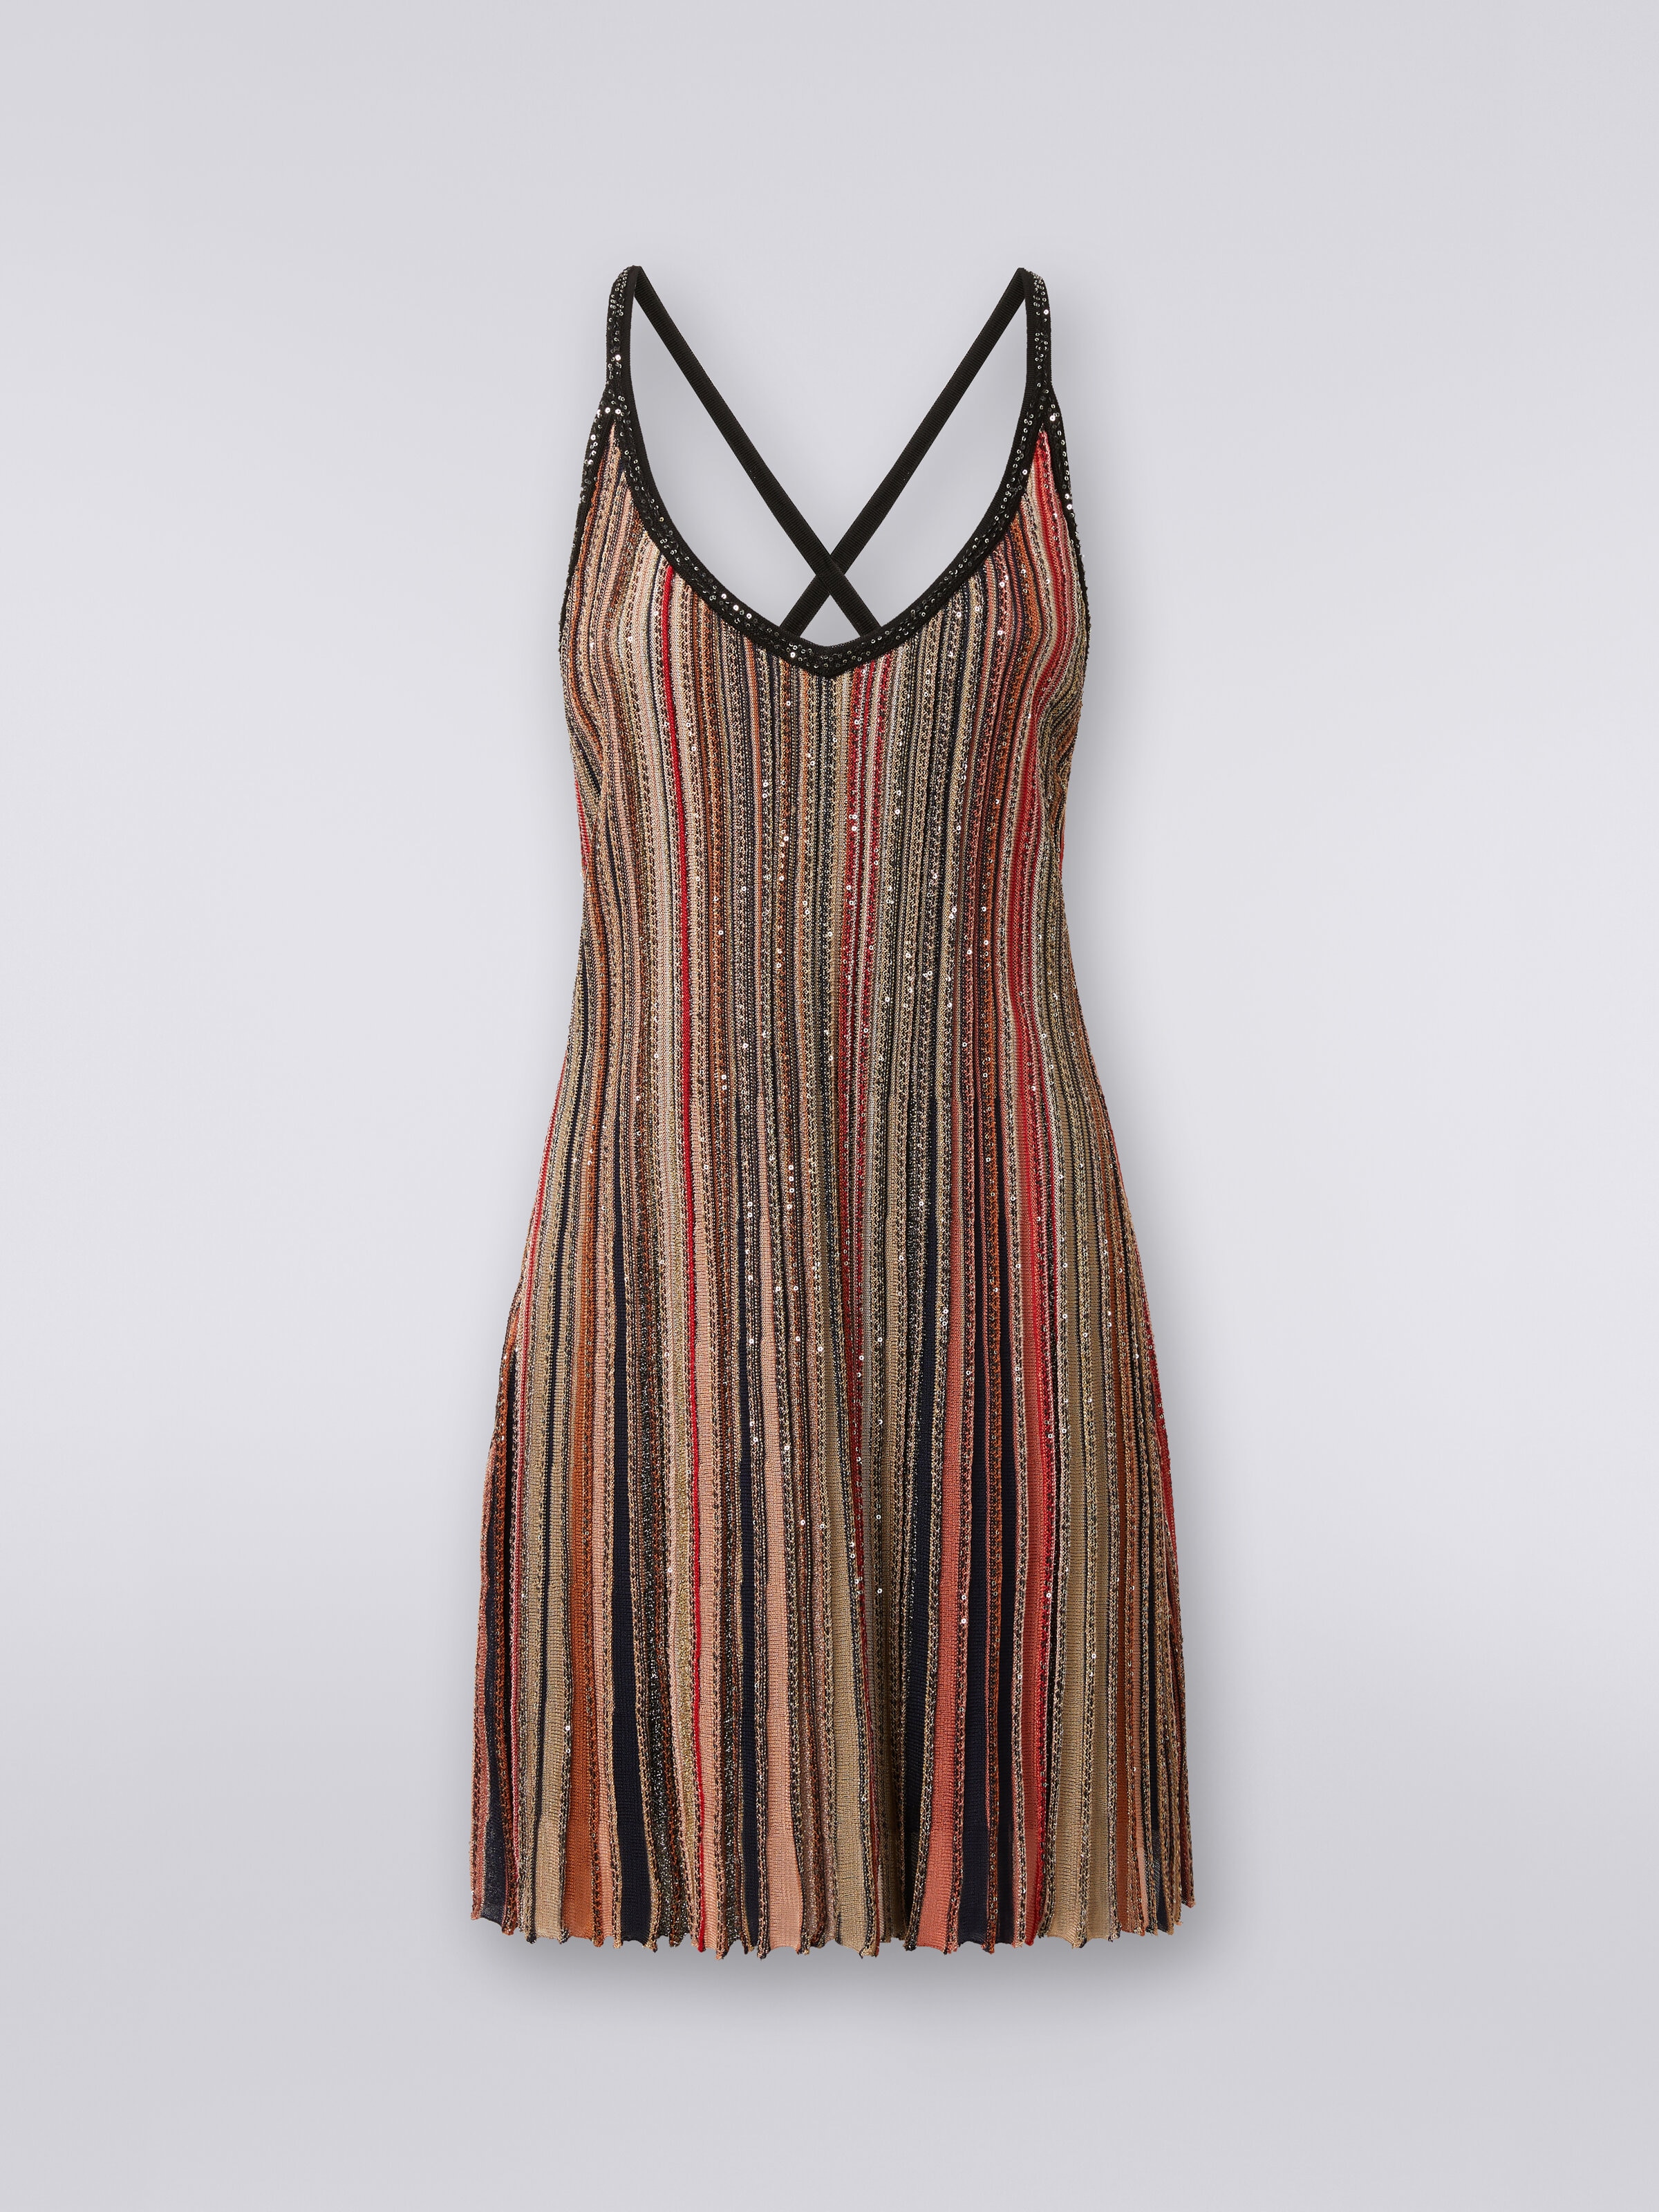 Minidress in vertical striped knit with sequins, Multicoloured  - 0